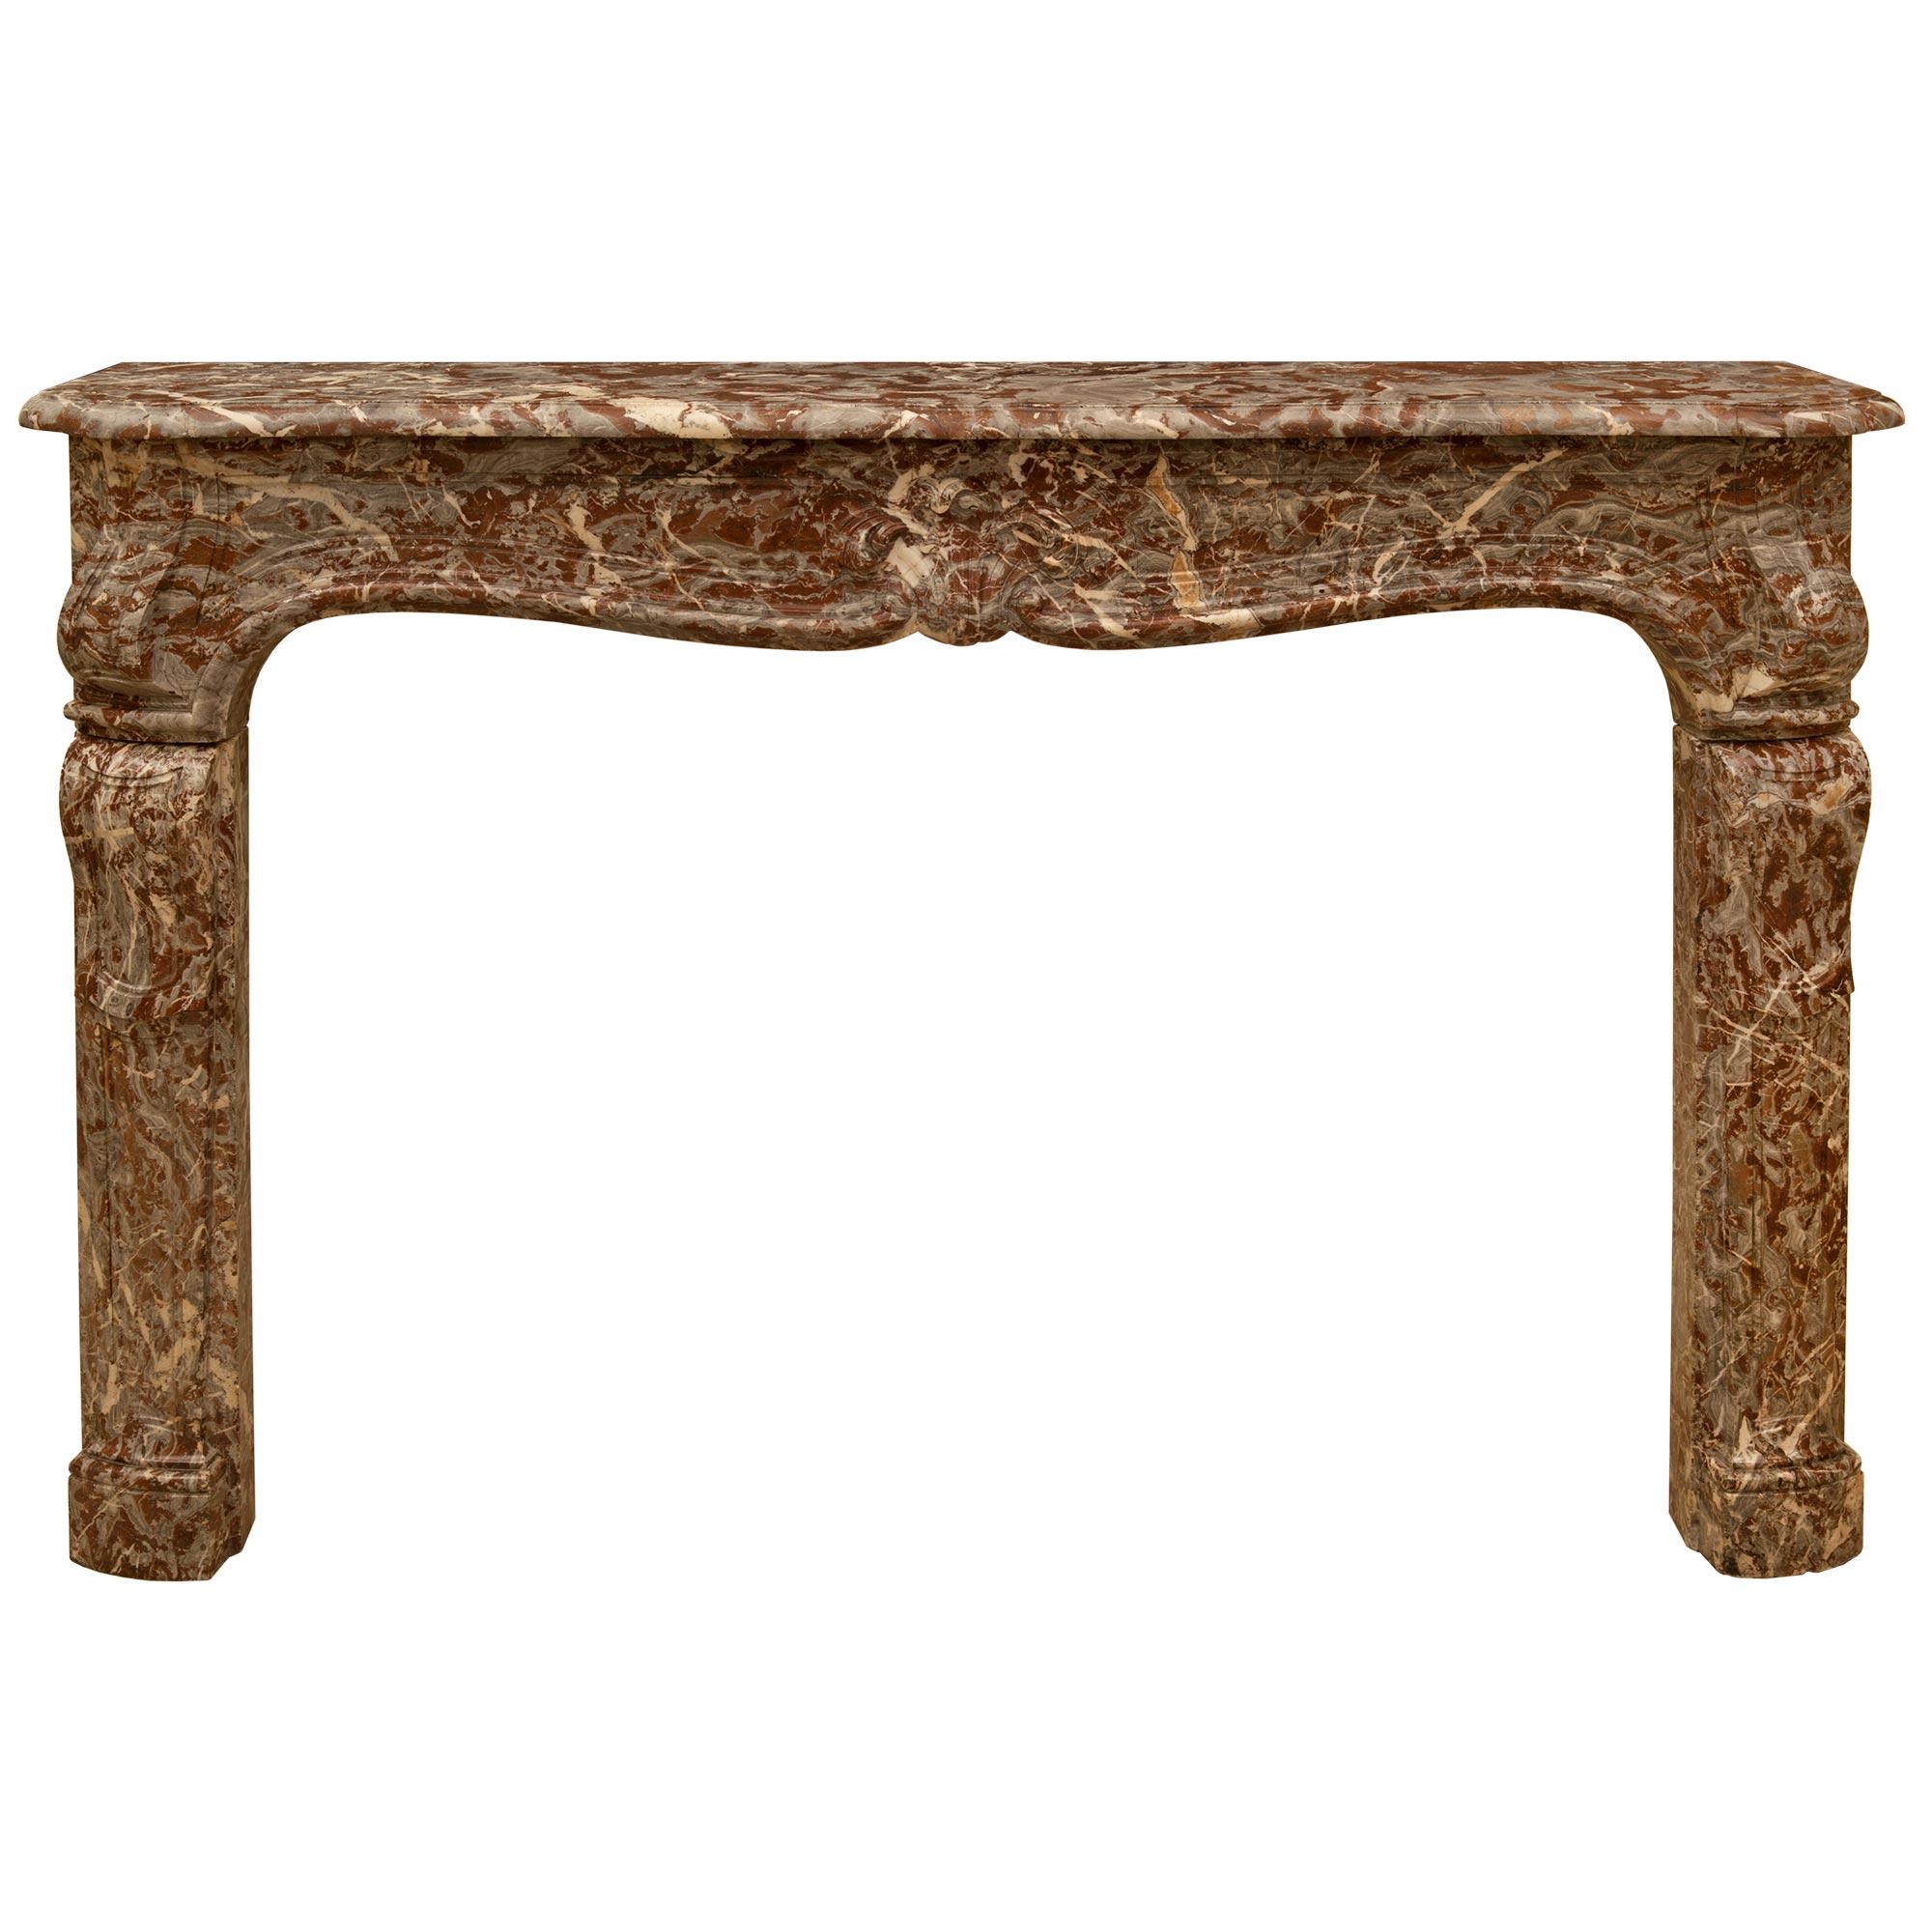 French 18th Century Louis XV Period Rouge Royal Marble Mantel For Sale